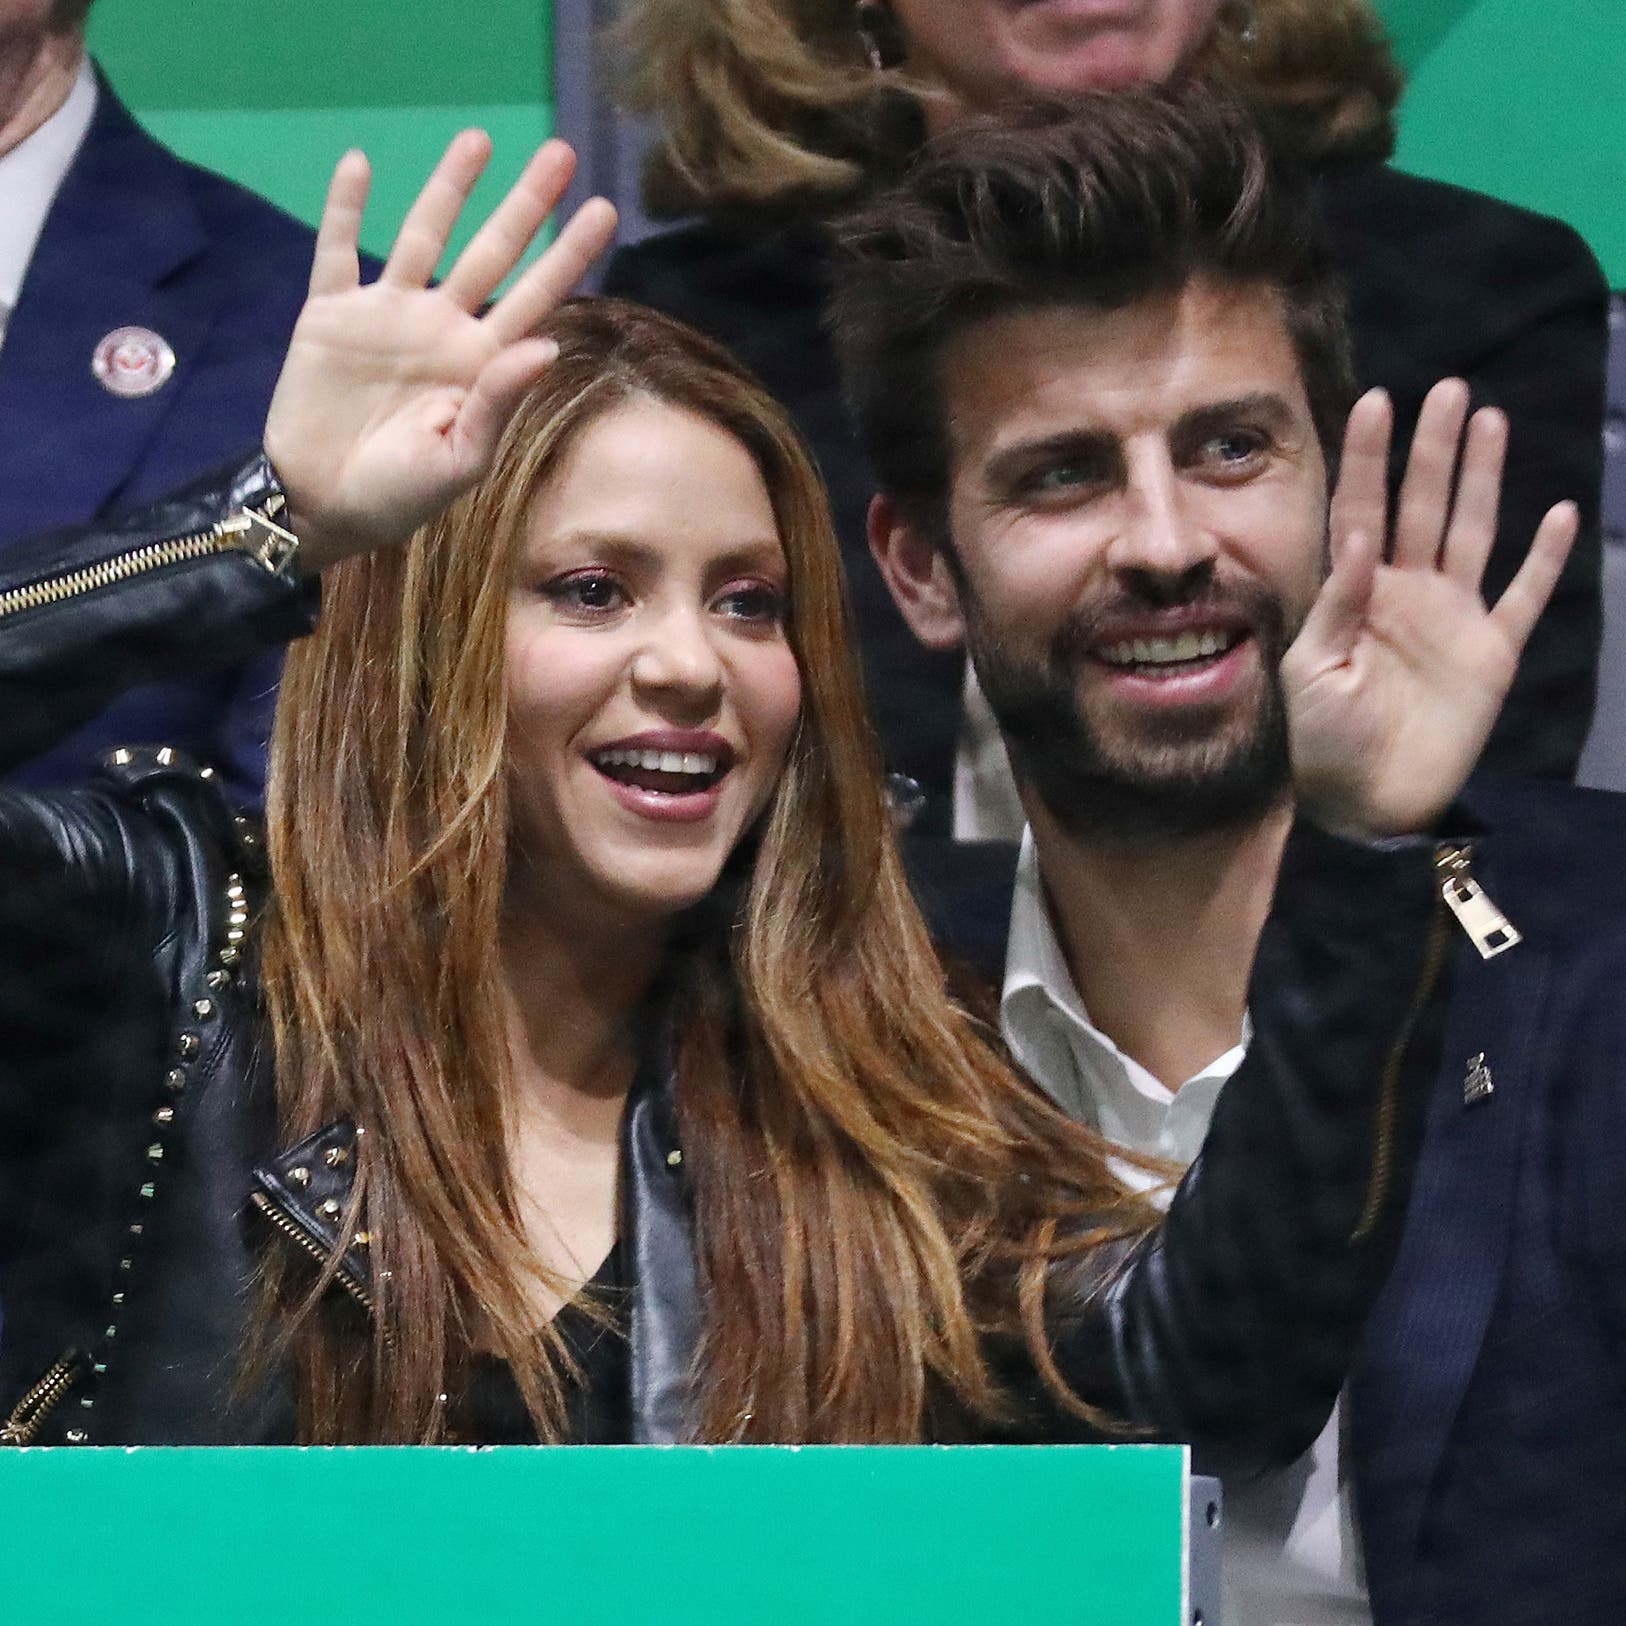 She used them to make fun of Pique.. Cassio and Renault respond to Shakira